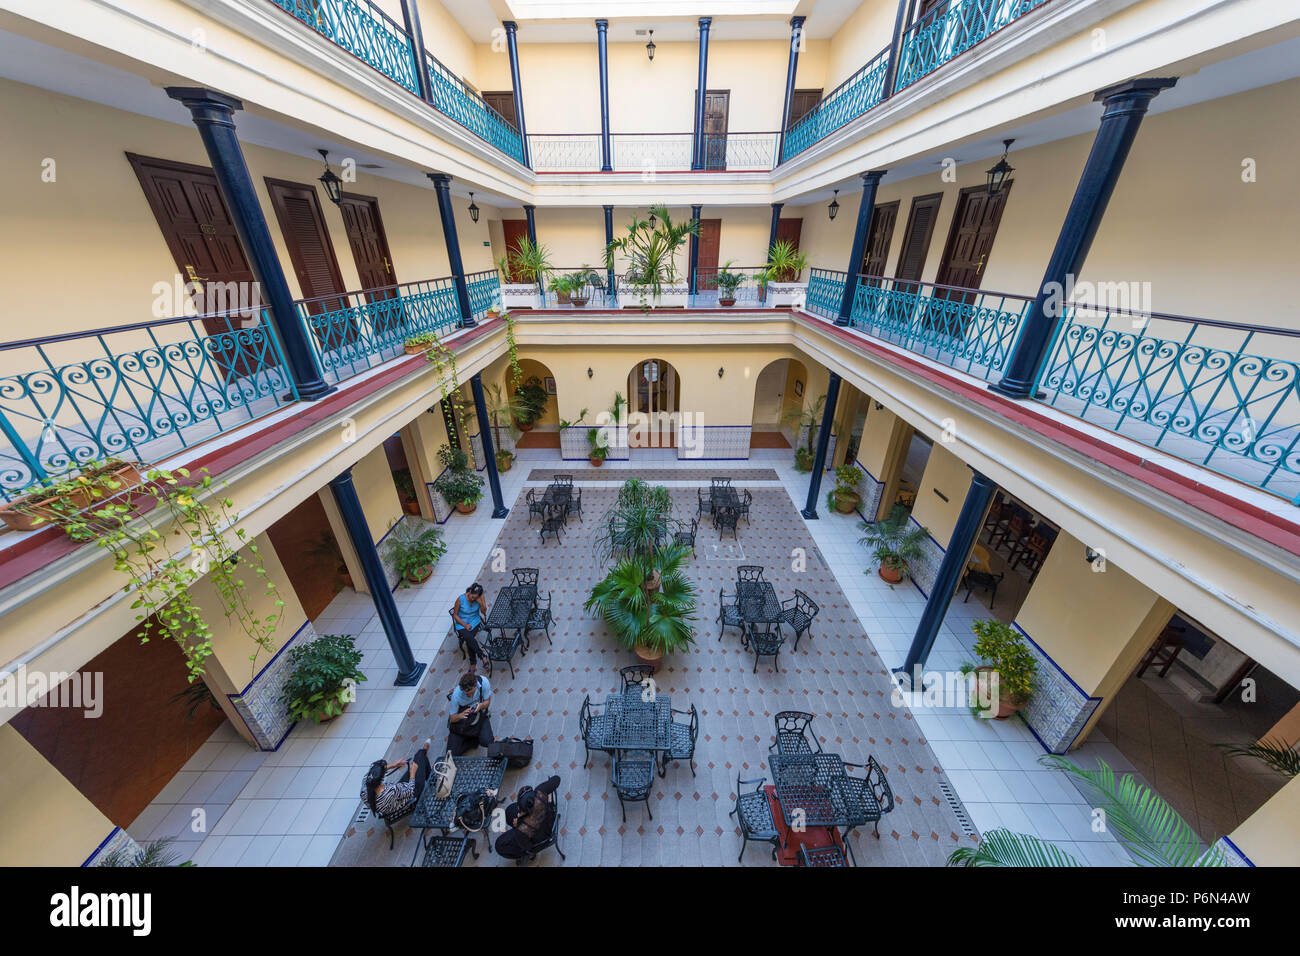 The beautiful private Hotel La Union, built in 1869 in downtown Cienfuegos, Cuba. Stock Photo